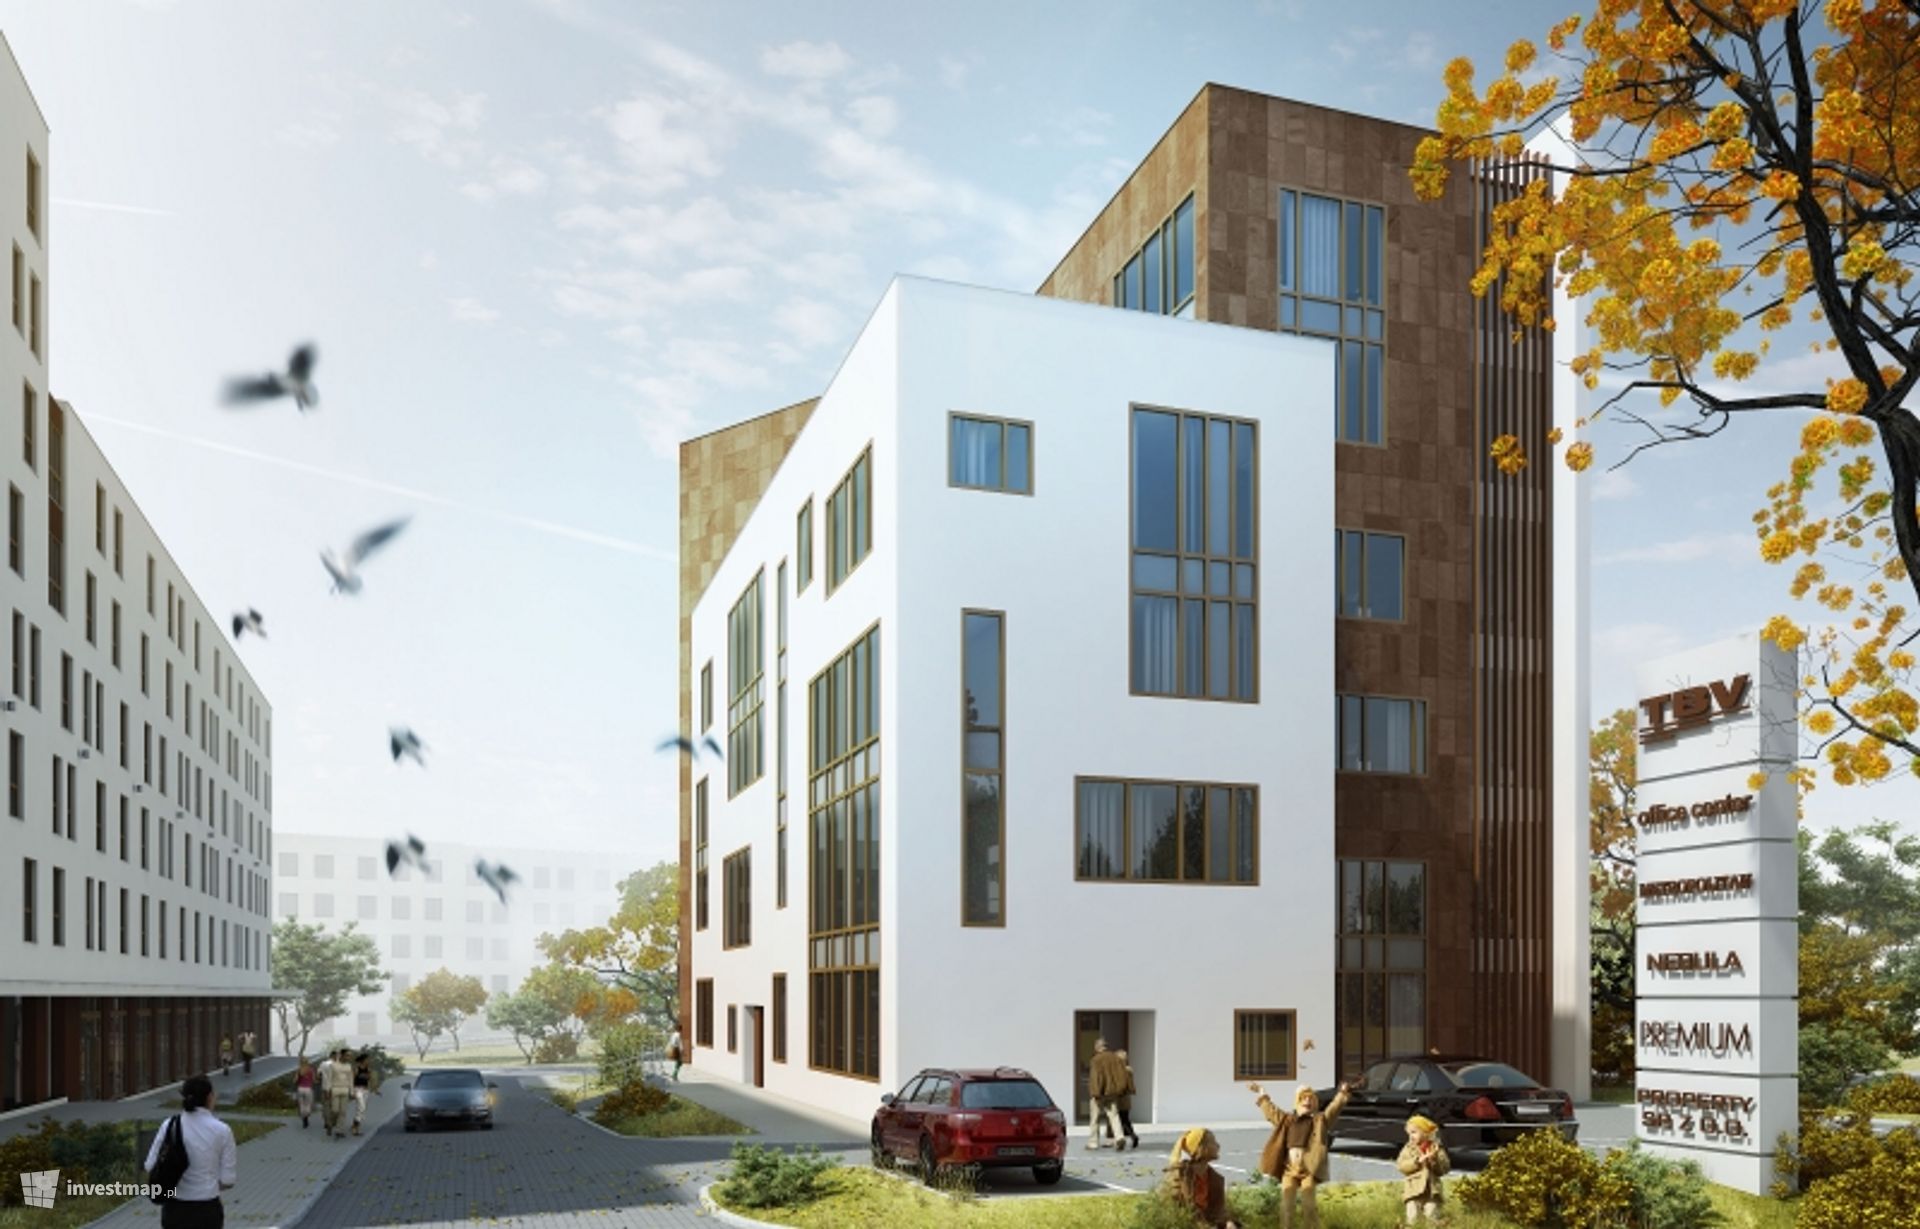 [Lublin] Biurowiec "TBV Office Center"